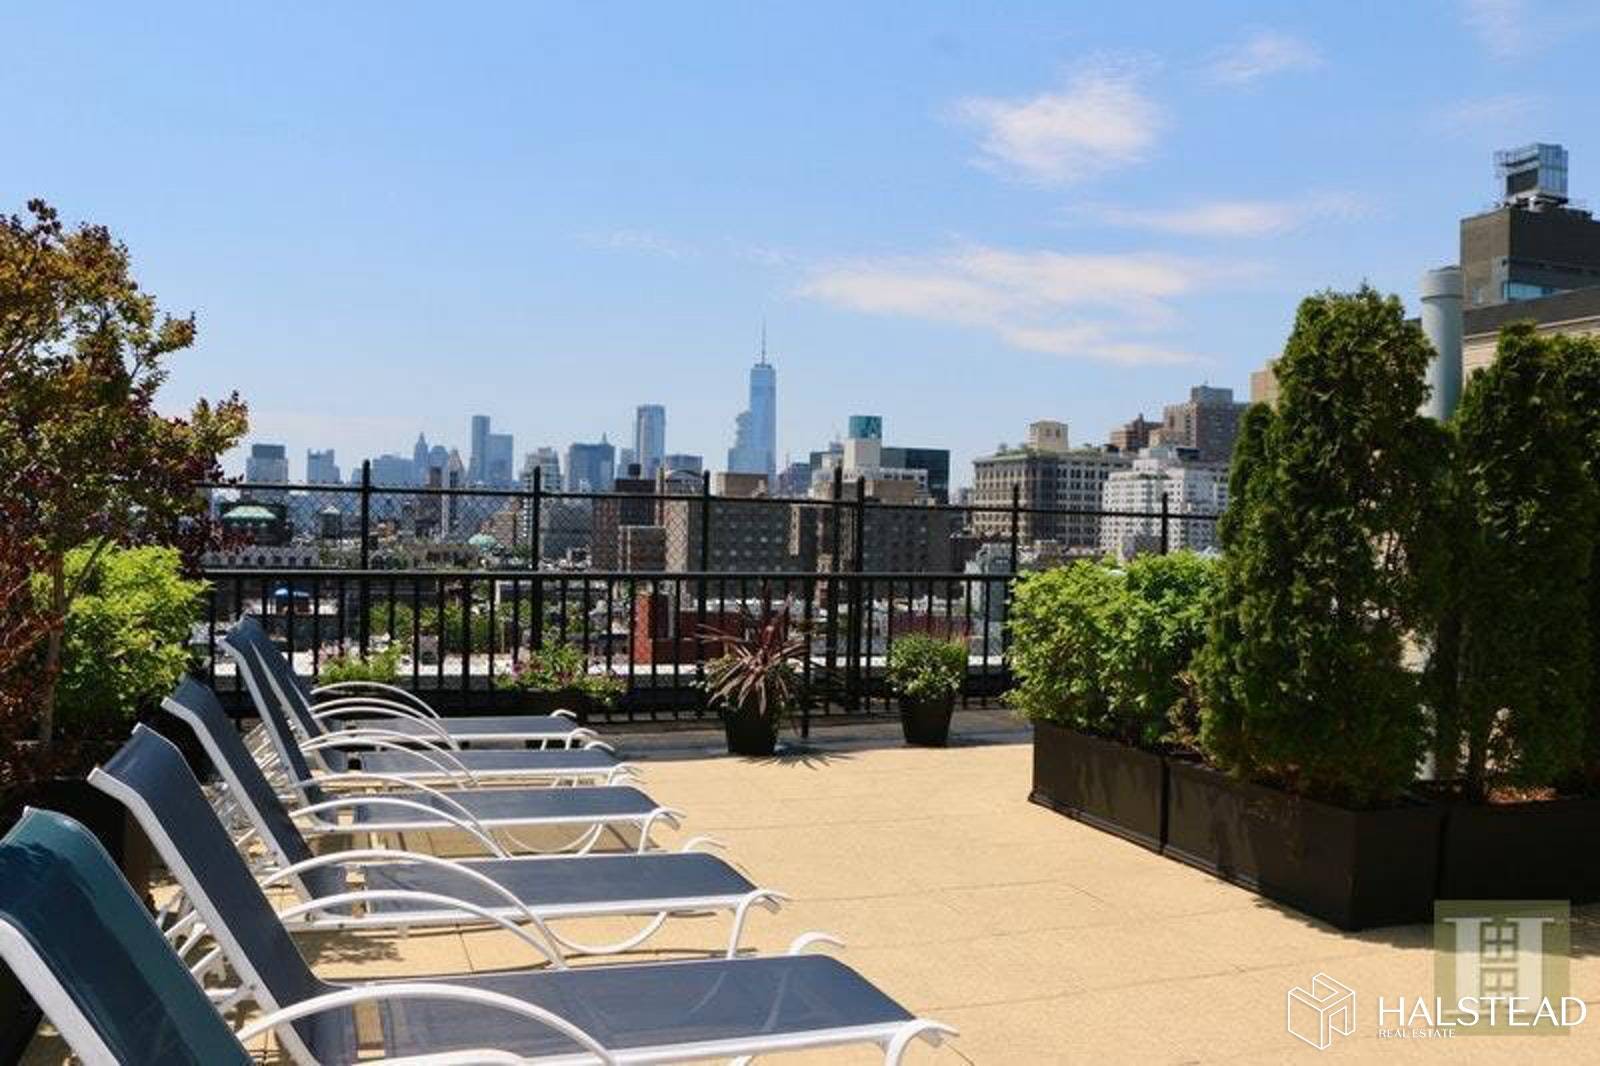 This highly desirable alcove studio layout boasting beautiful tree lined views overlooking Stuyvesant Square Park will make you feel like you have a country oasis in the heart of Gramercy.